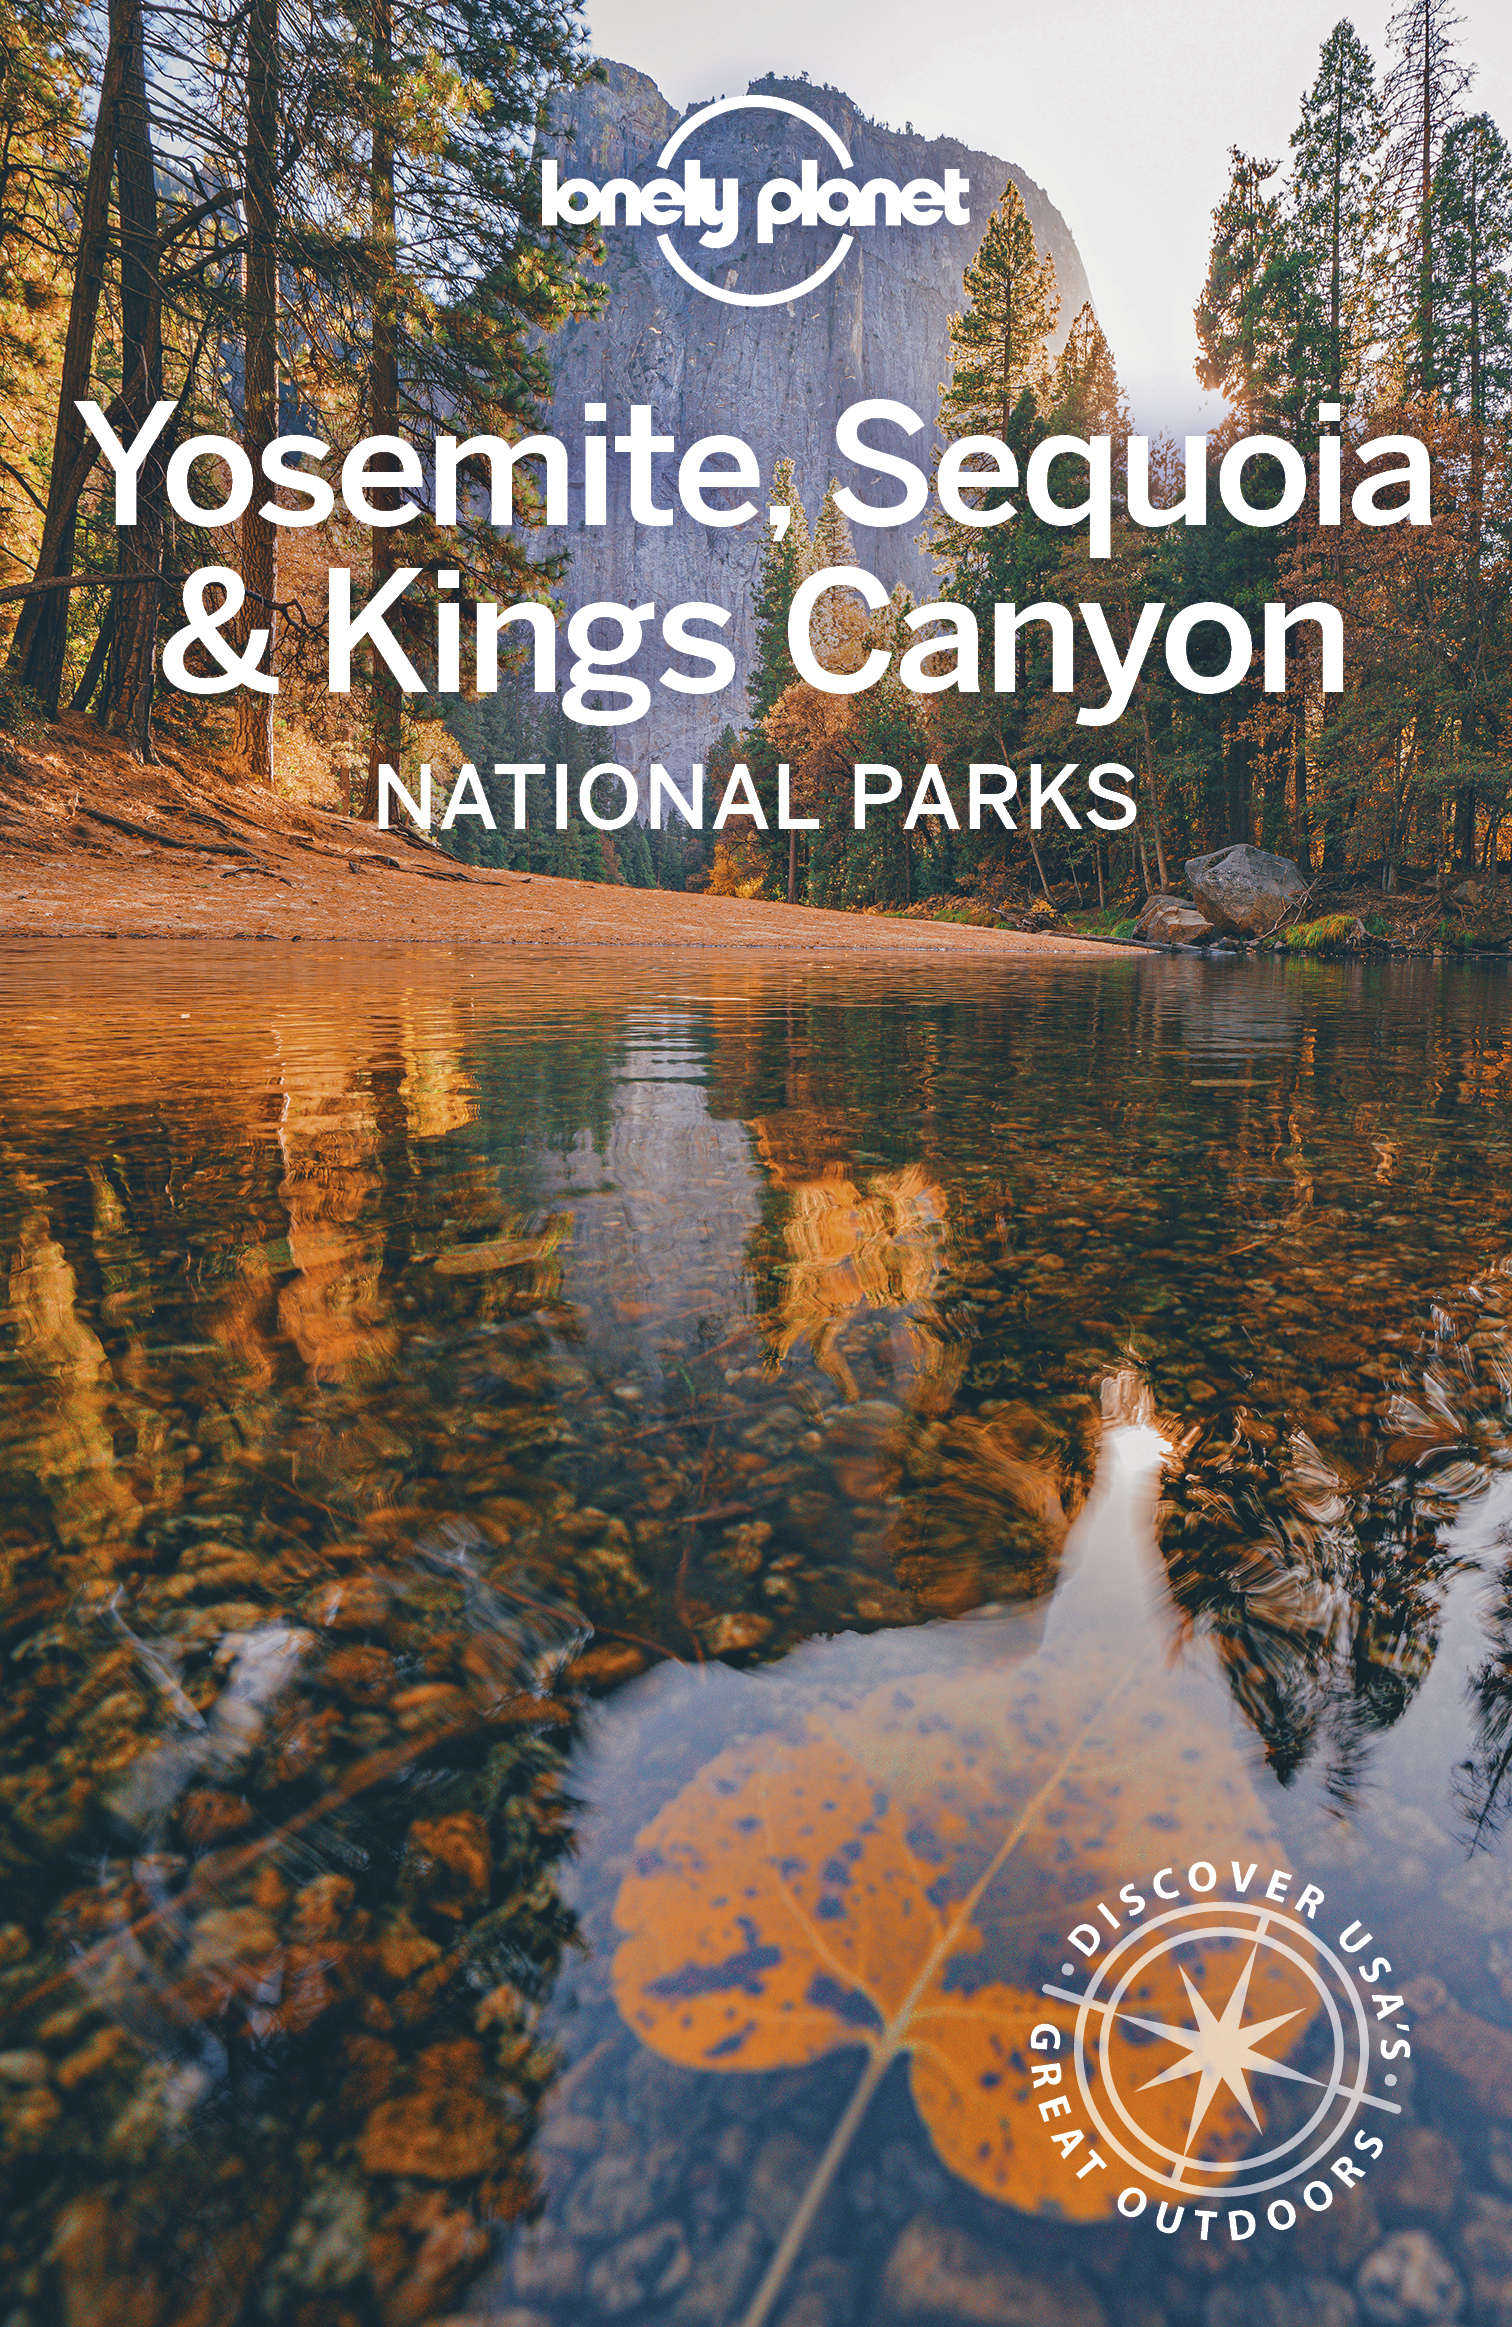 Lonely Planet Yosemite Sequoia Kings Canyon National Parks 6 National Parks Guide - image 1